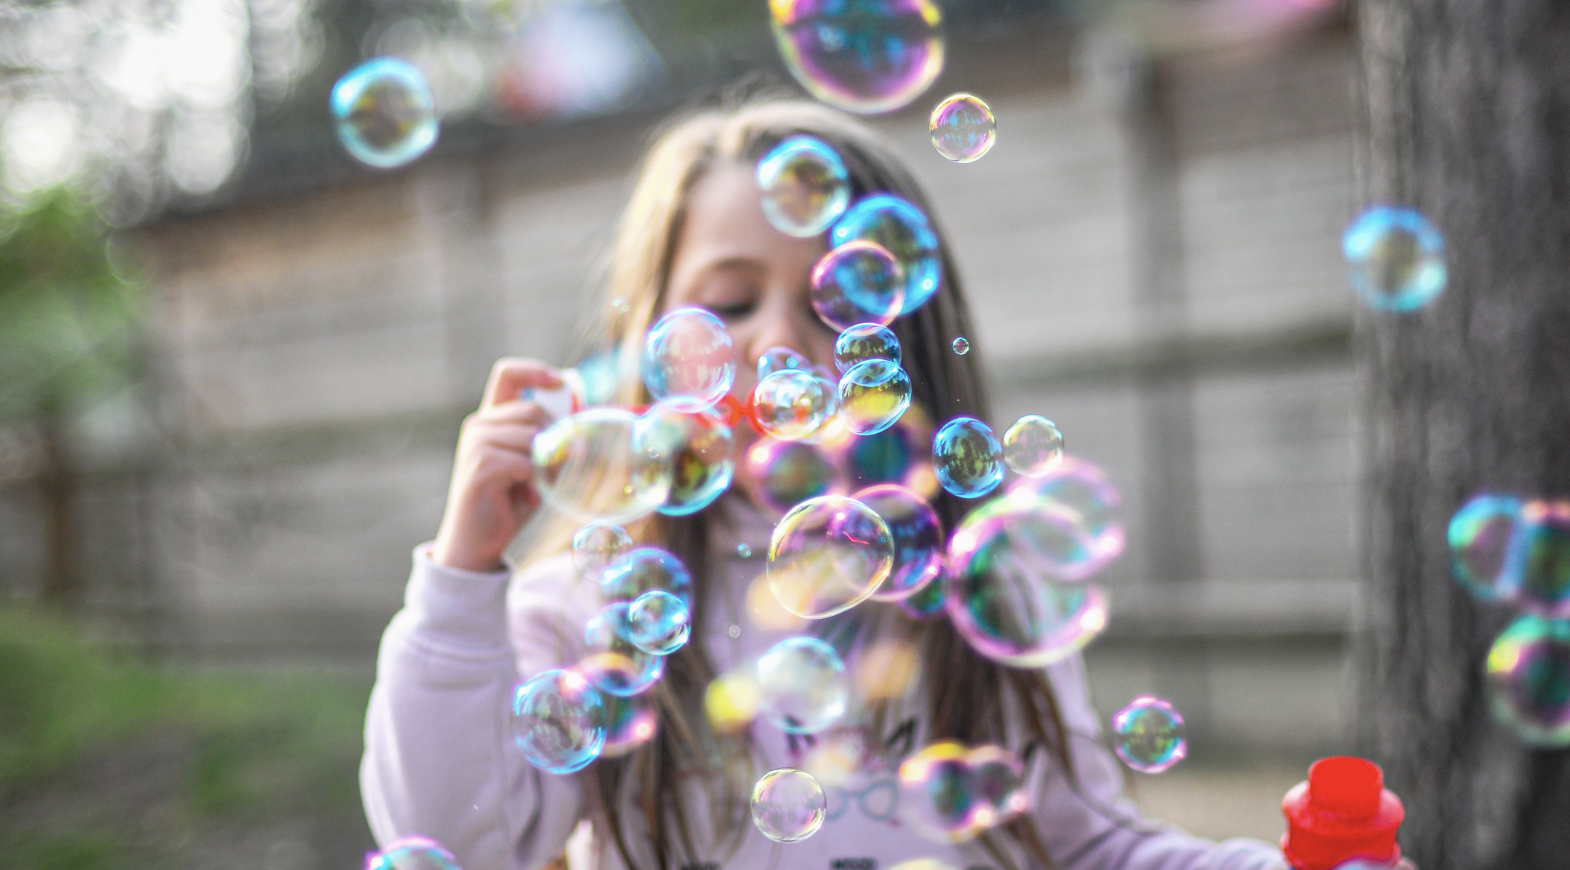 Buy Sell Love Durham featured blog image - little girl with bubbles